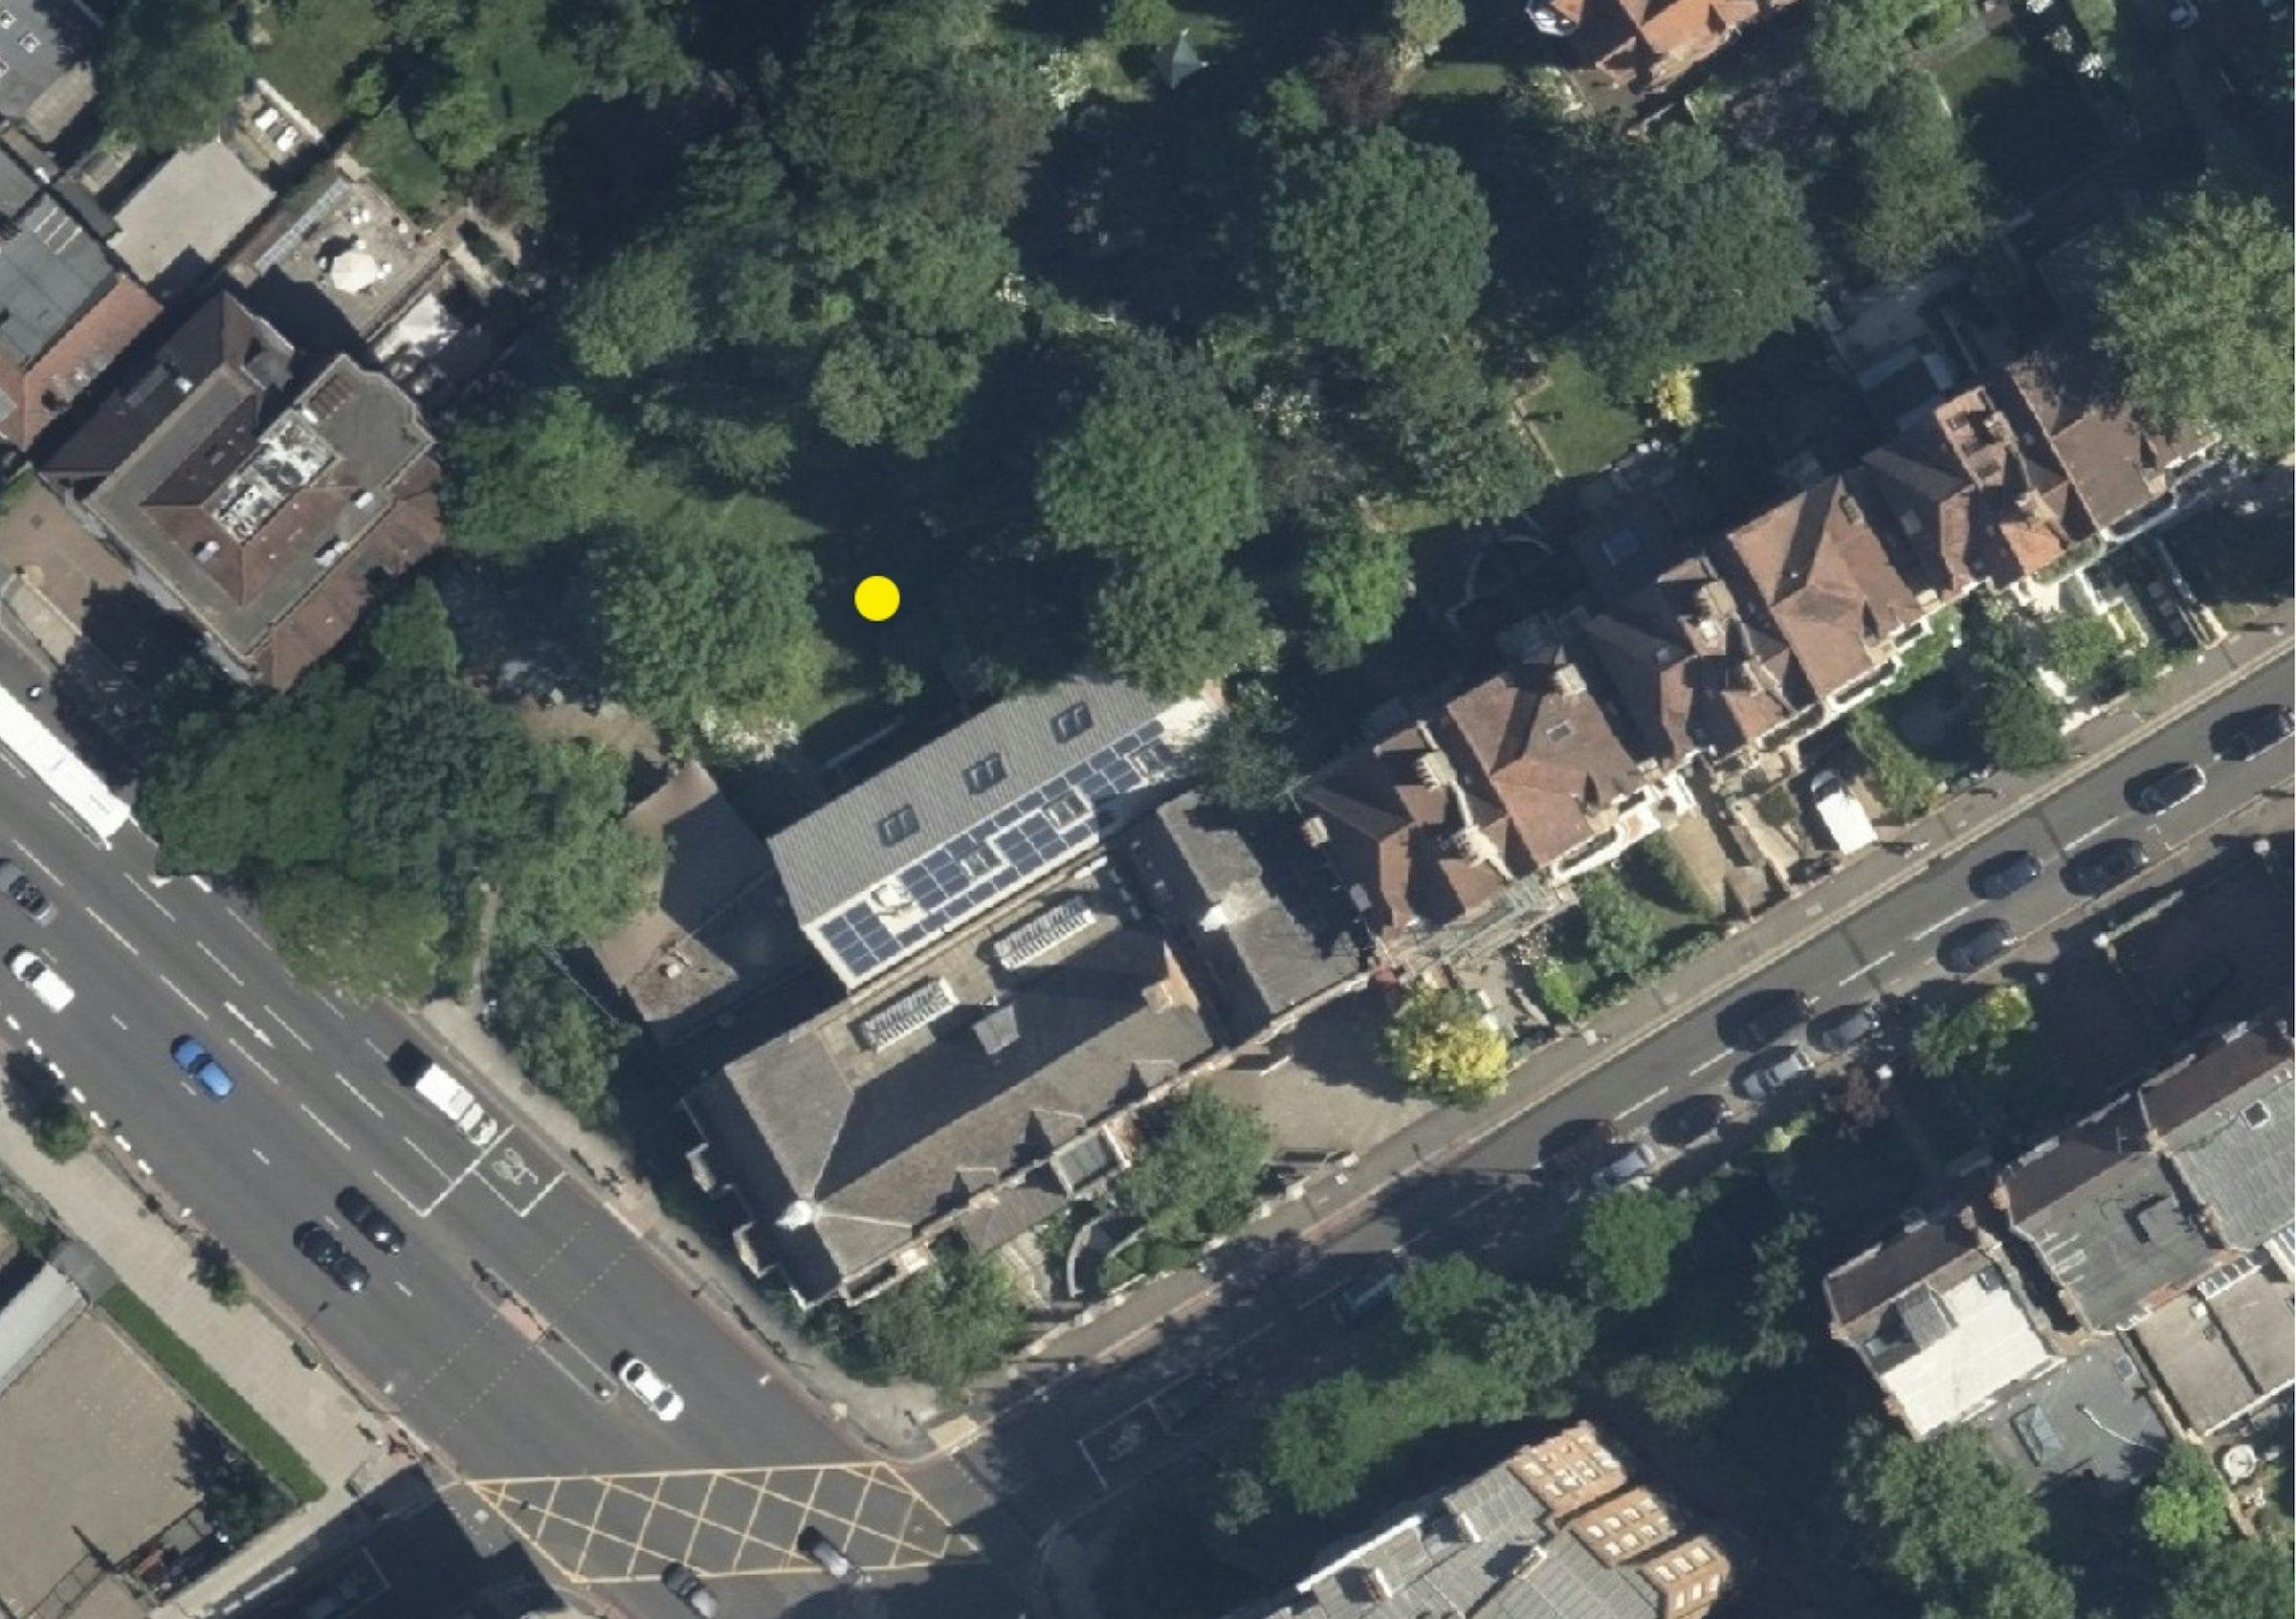 an image of an ariel view of Camden Arts Centre, London with a yellow dot in the middle